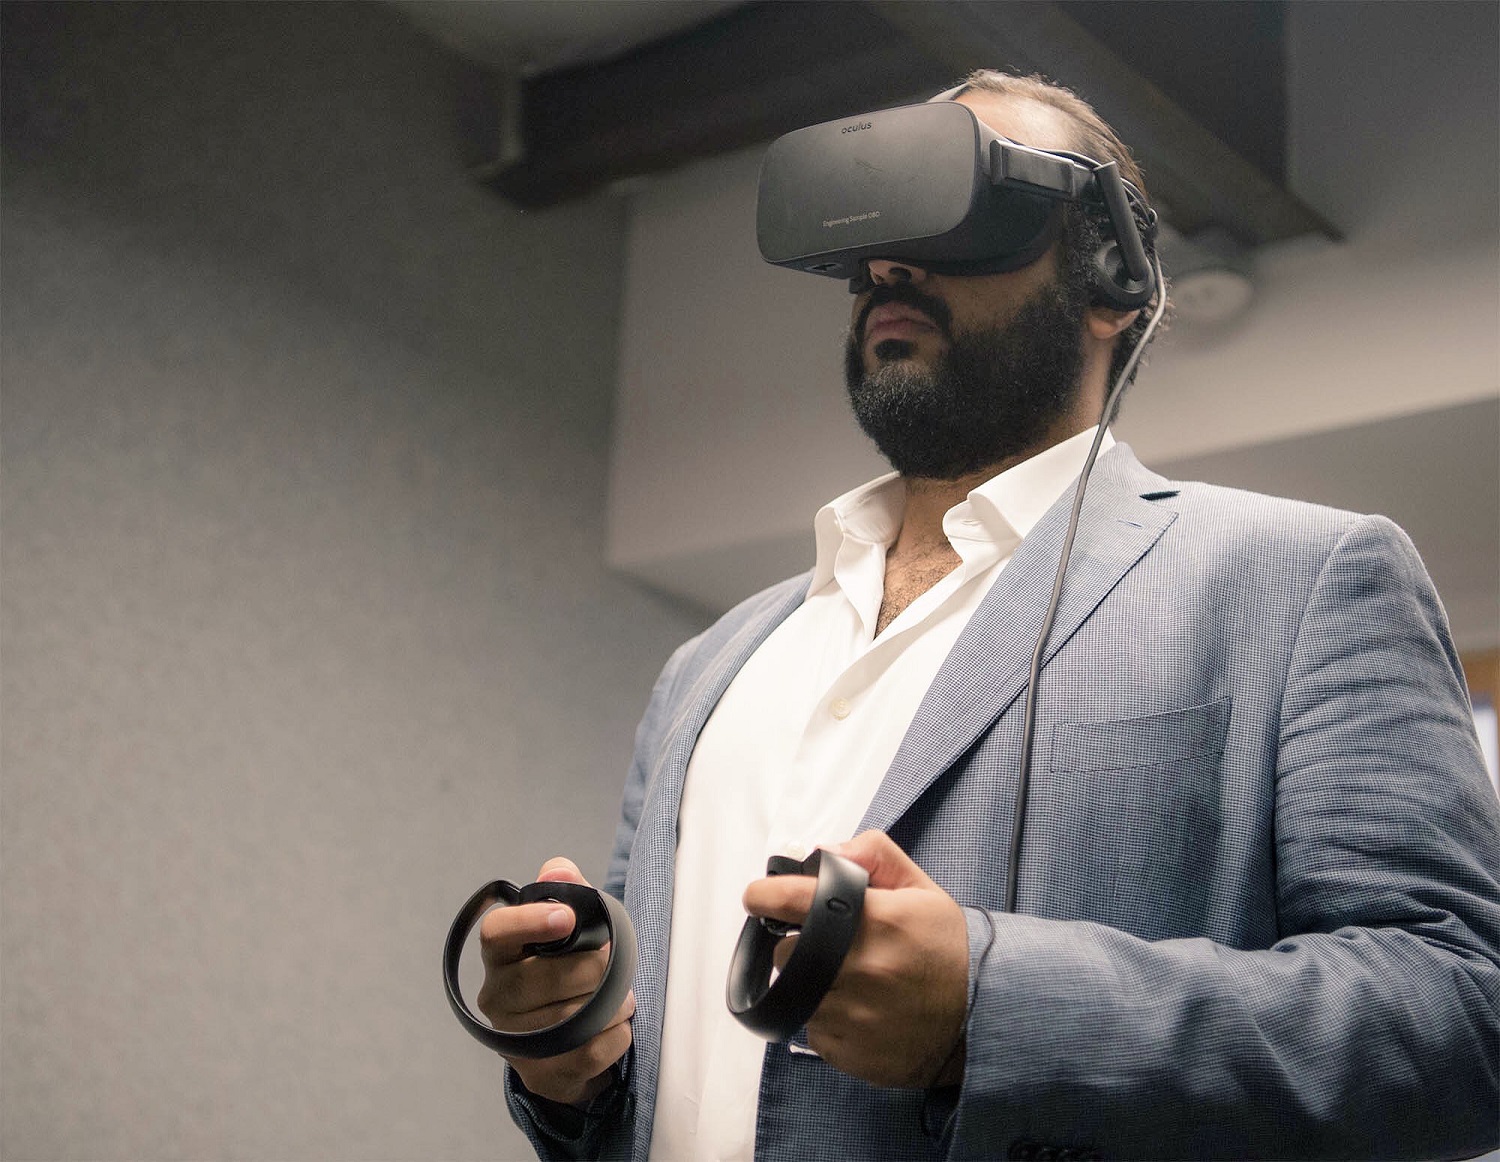 The Deputy Crown Prince tried out Oculus, the virtual reality set purchased by Facebook, Inc. 